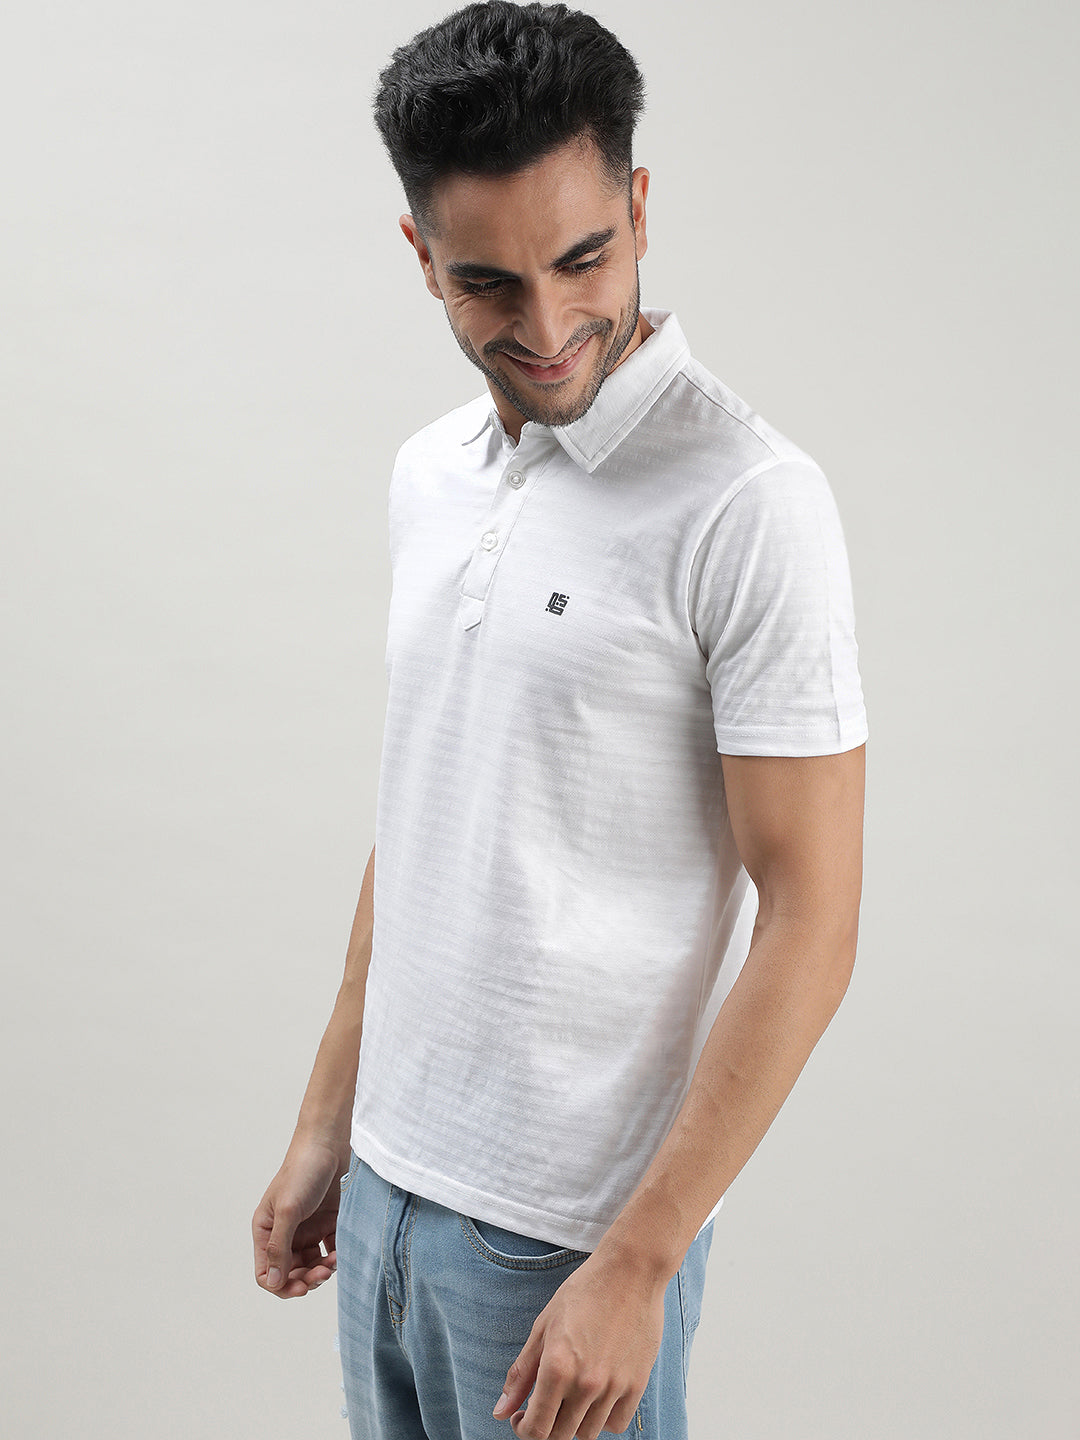 White Polo T-shirt for Men at Loom & Spin